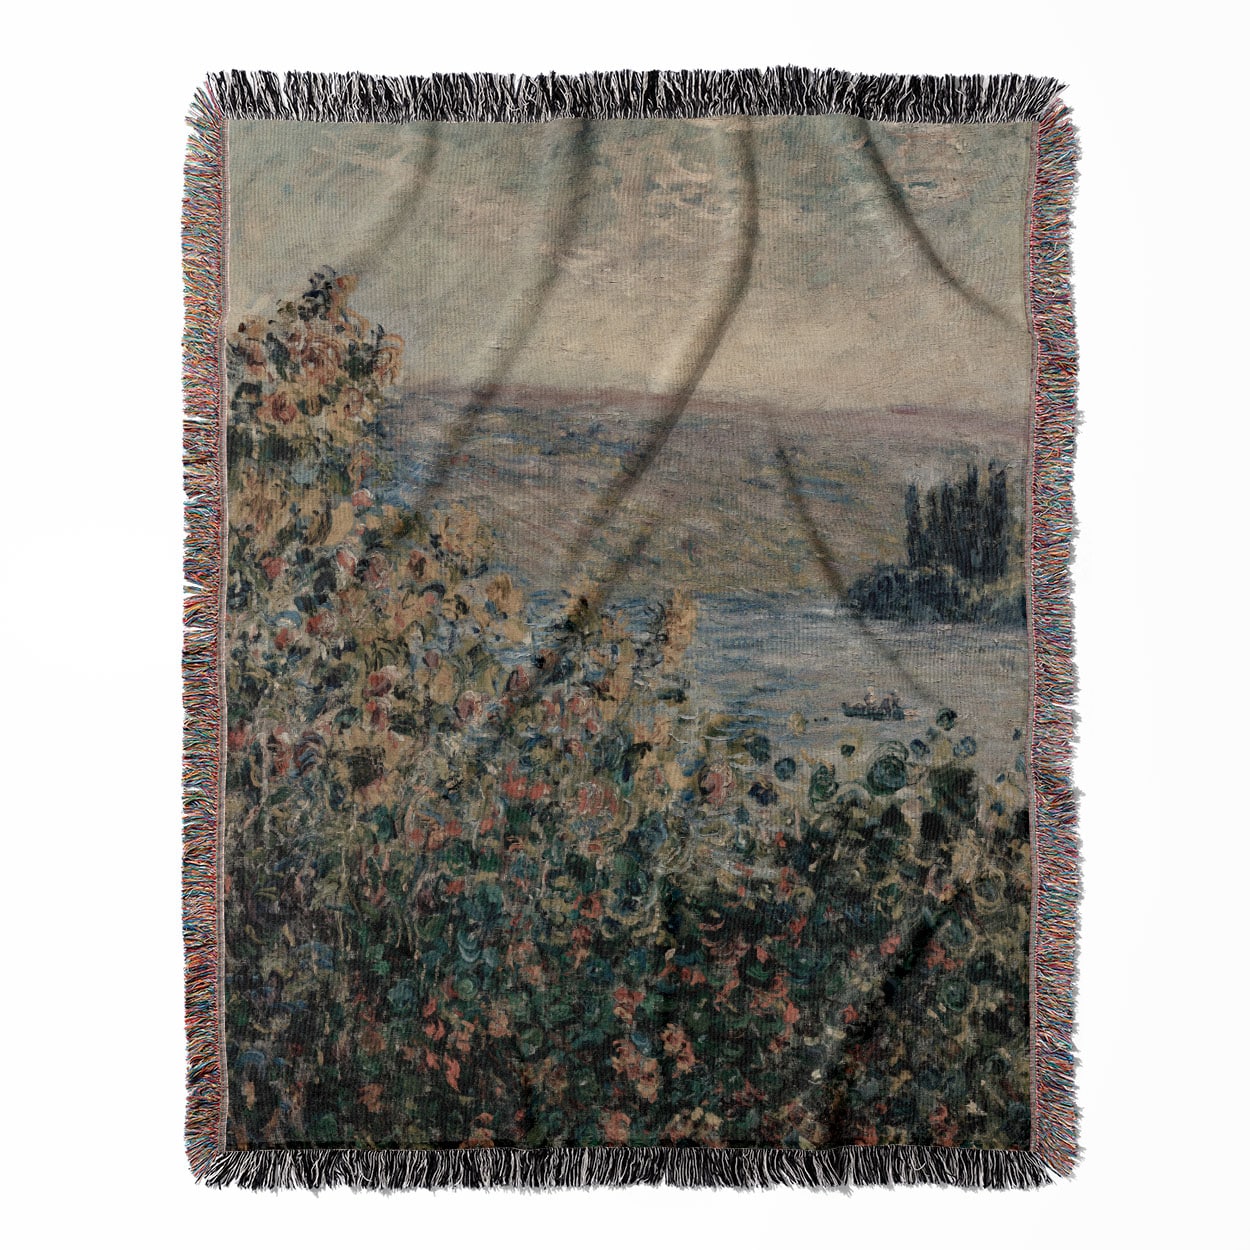 Muted Floral woven throw blanket, crafted from 100% cotton, offering a soft and cozy texture with green, pink, and red designs for home decor.